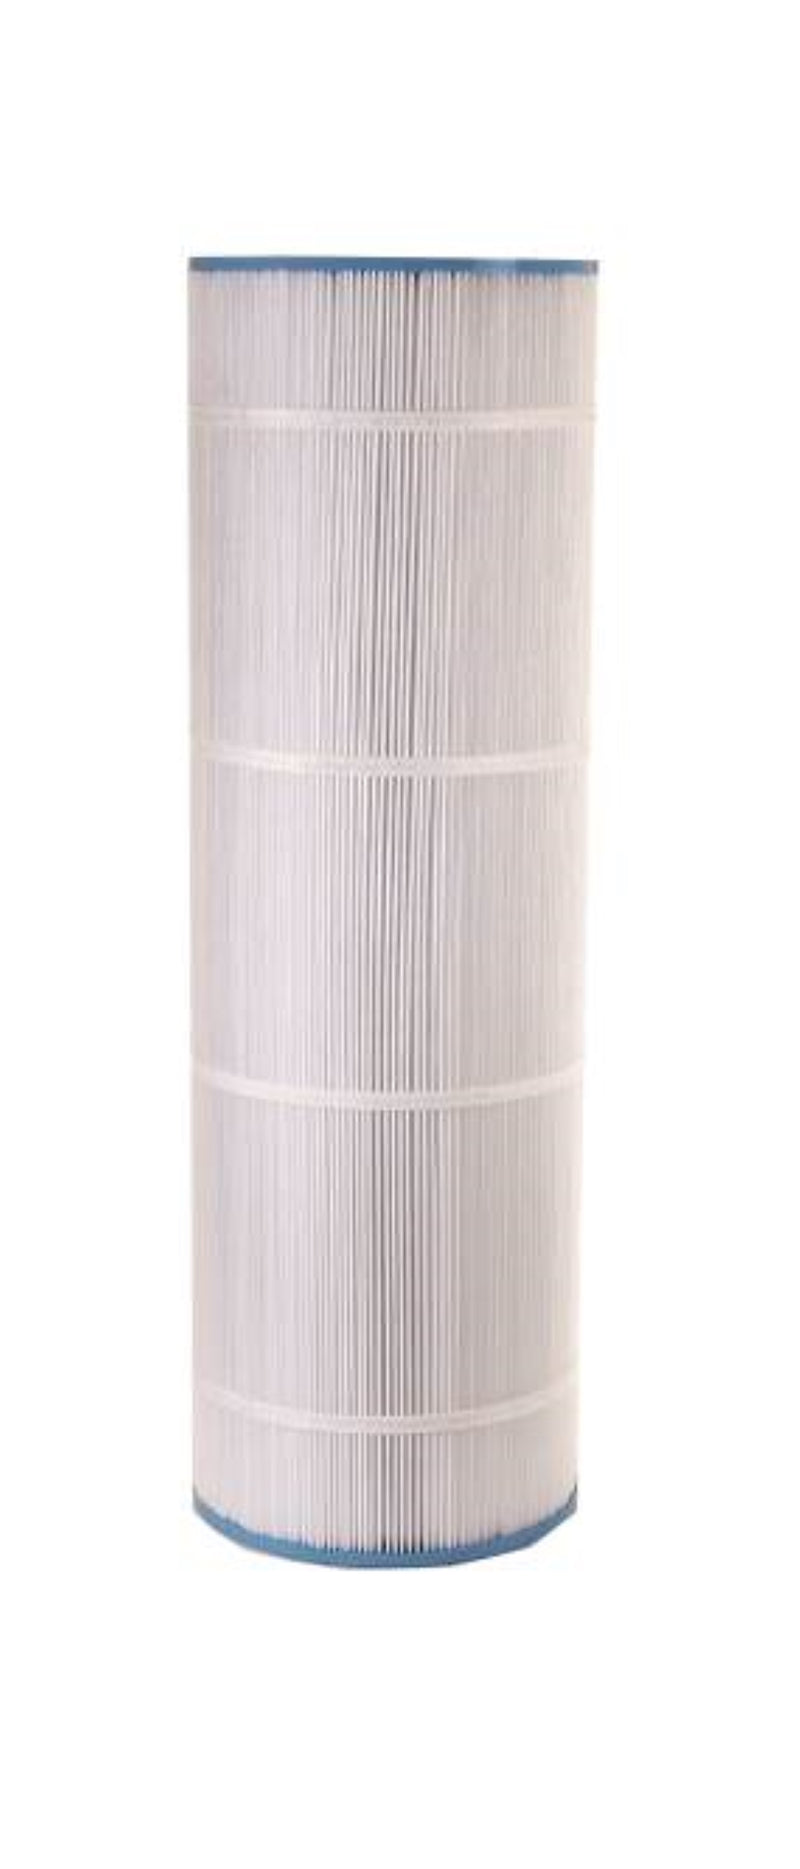 Unicel C-8416 Pool Spa Replacement Cartridge Filter 150 Sq Ft Sta-Rite PXC-150 - VMInnovations